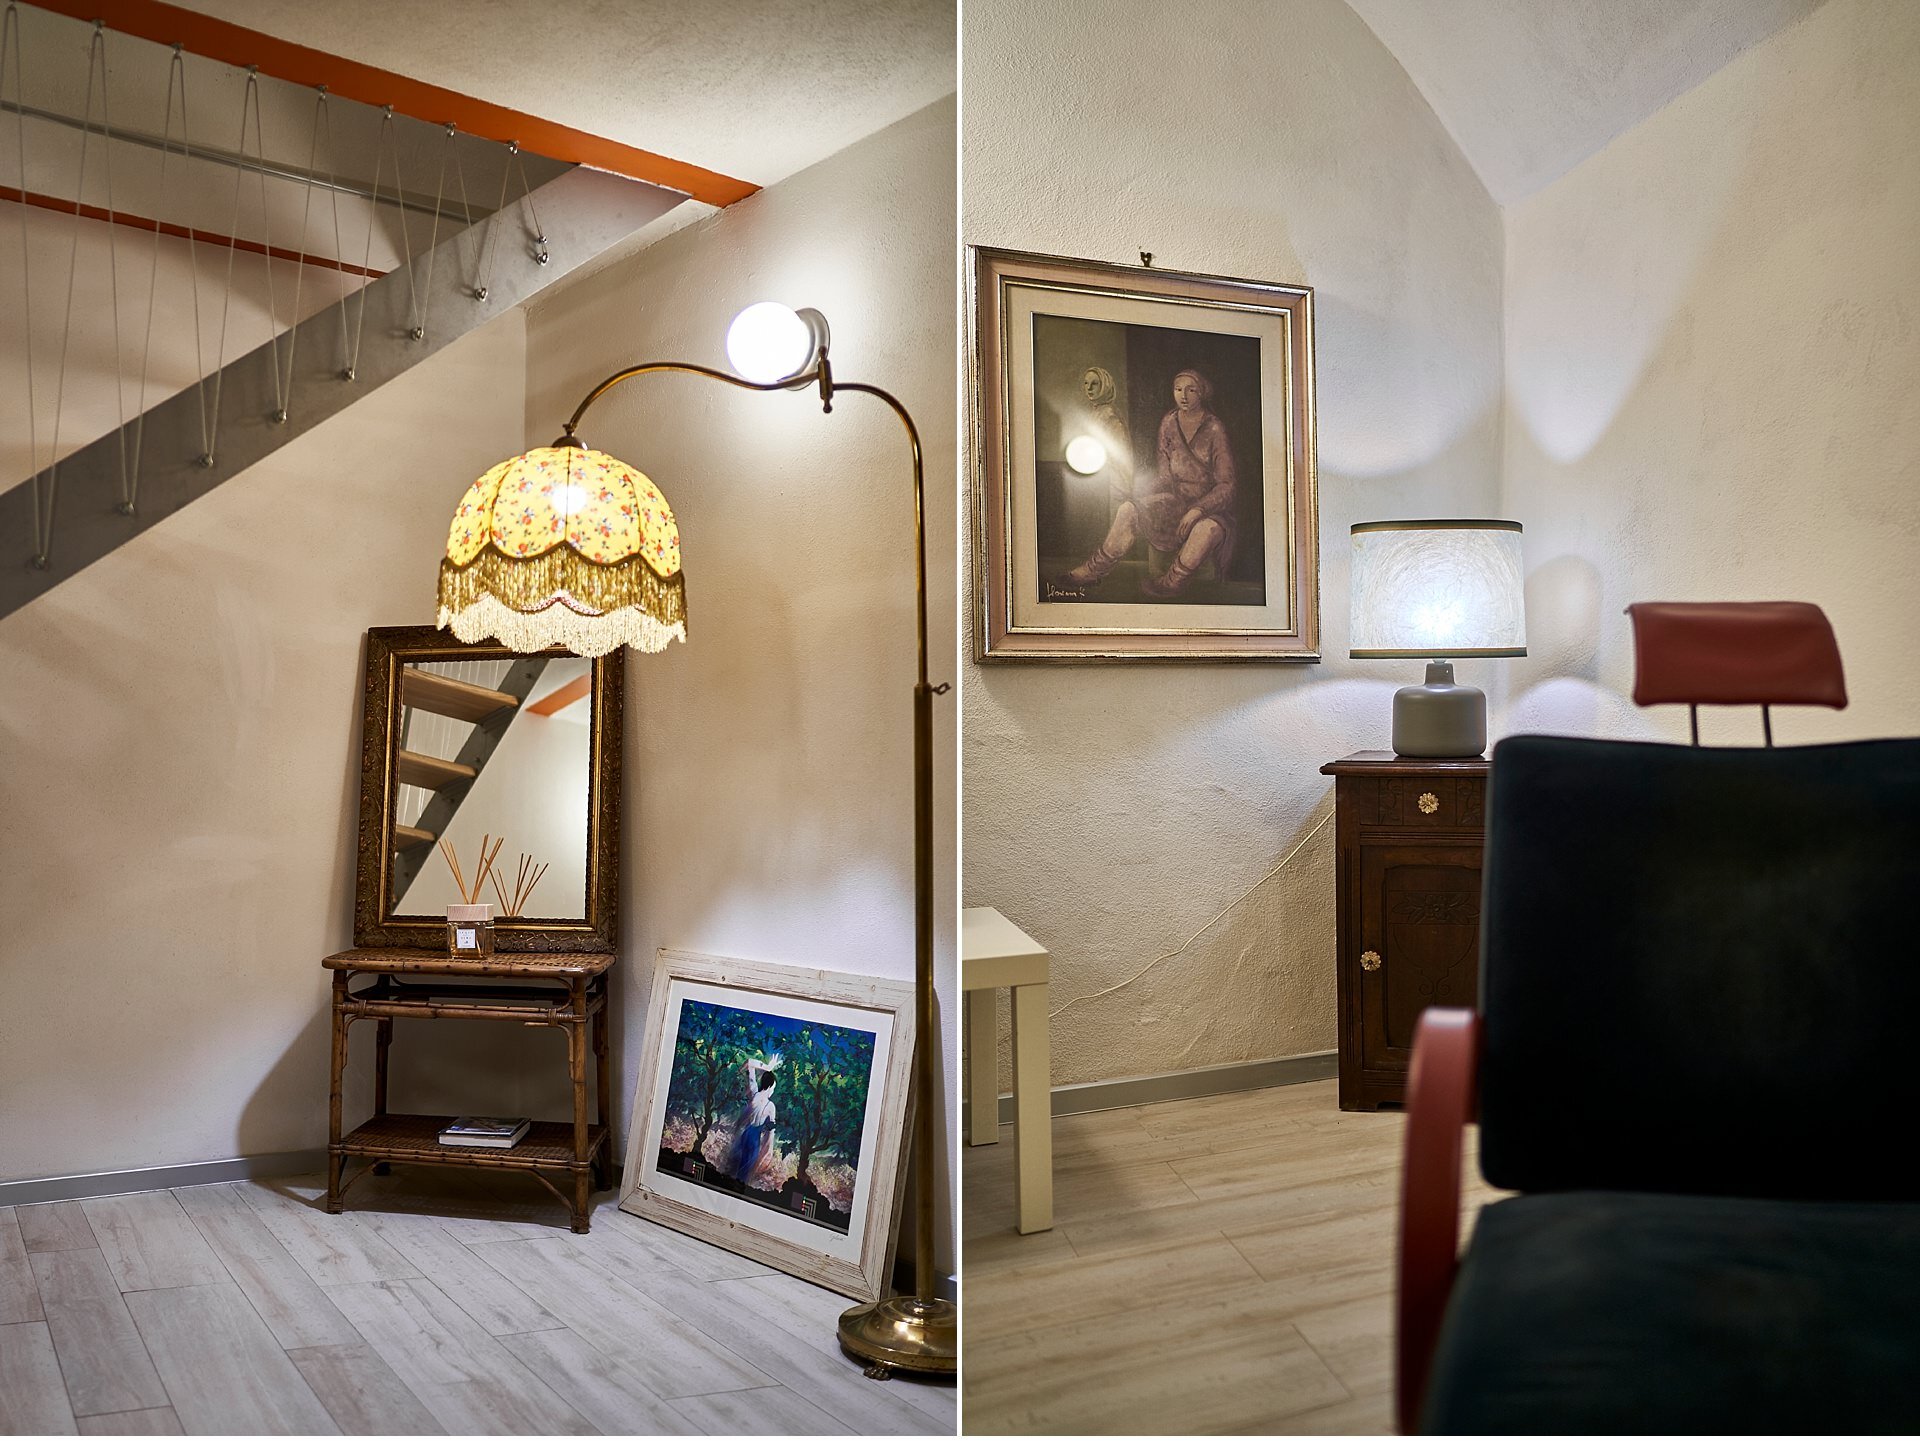  Nice renovated open space in the historic center of Siena. Large living area and a bedroom obtained from a mezzanine, valuable furnishings. The apartment is available for rental and as a holiday home. The photo shoot was managed by the architectural